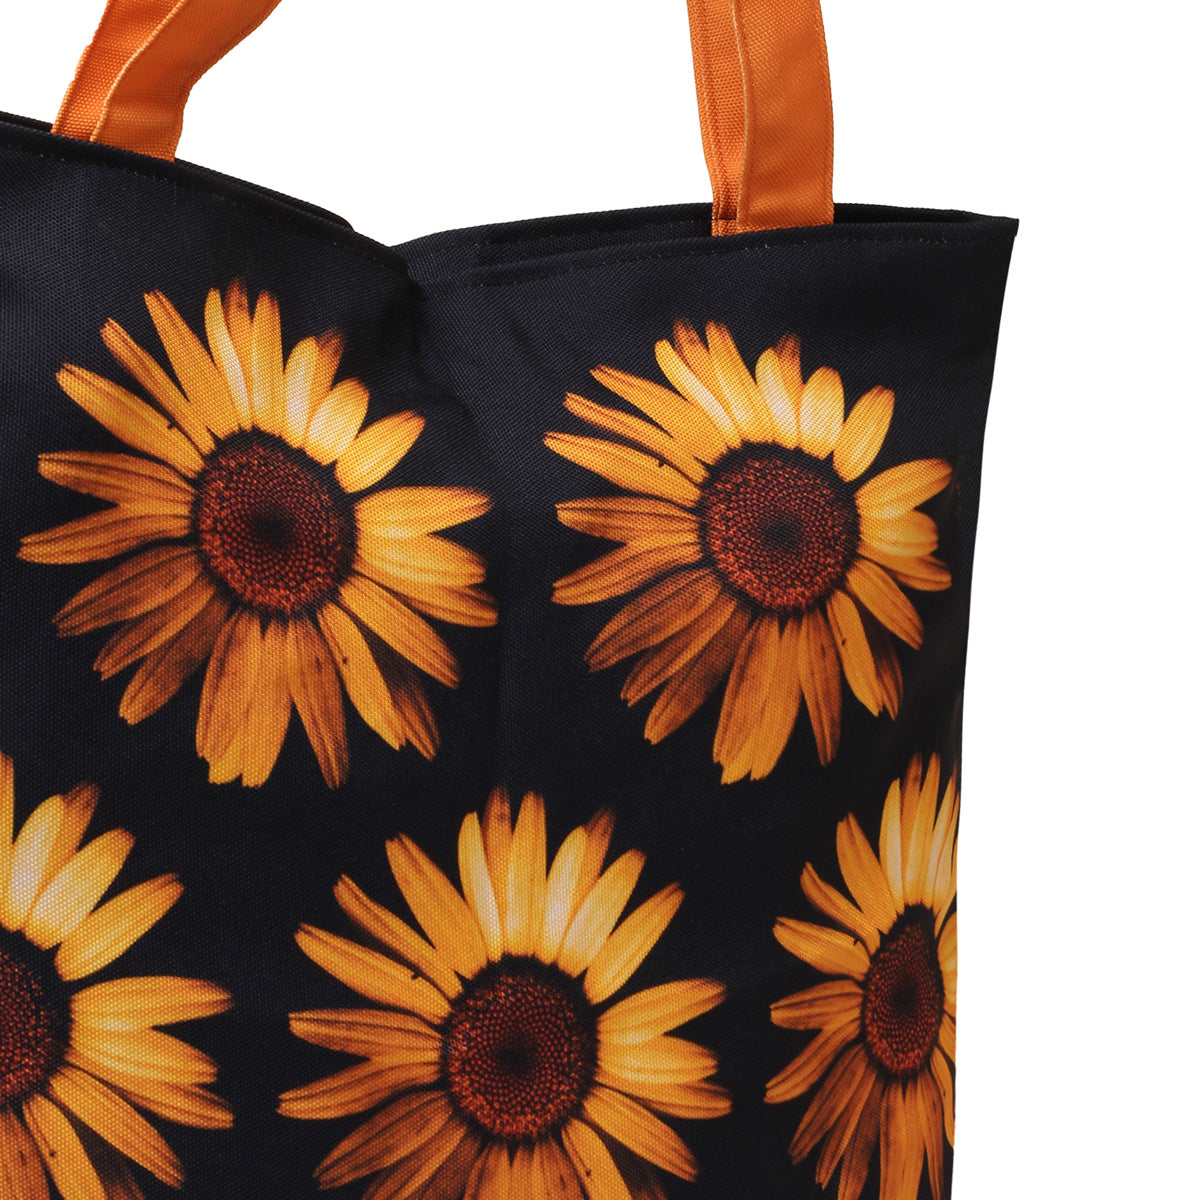 Chic tote bag adorned with sunflowers in black and orange.